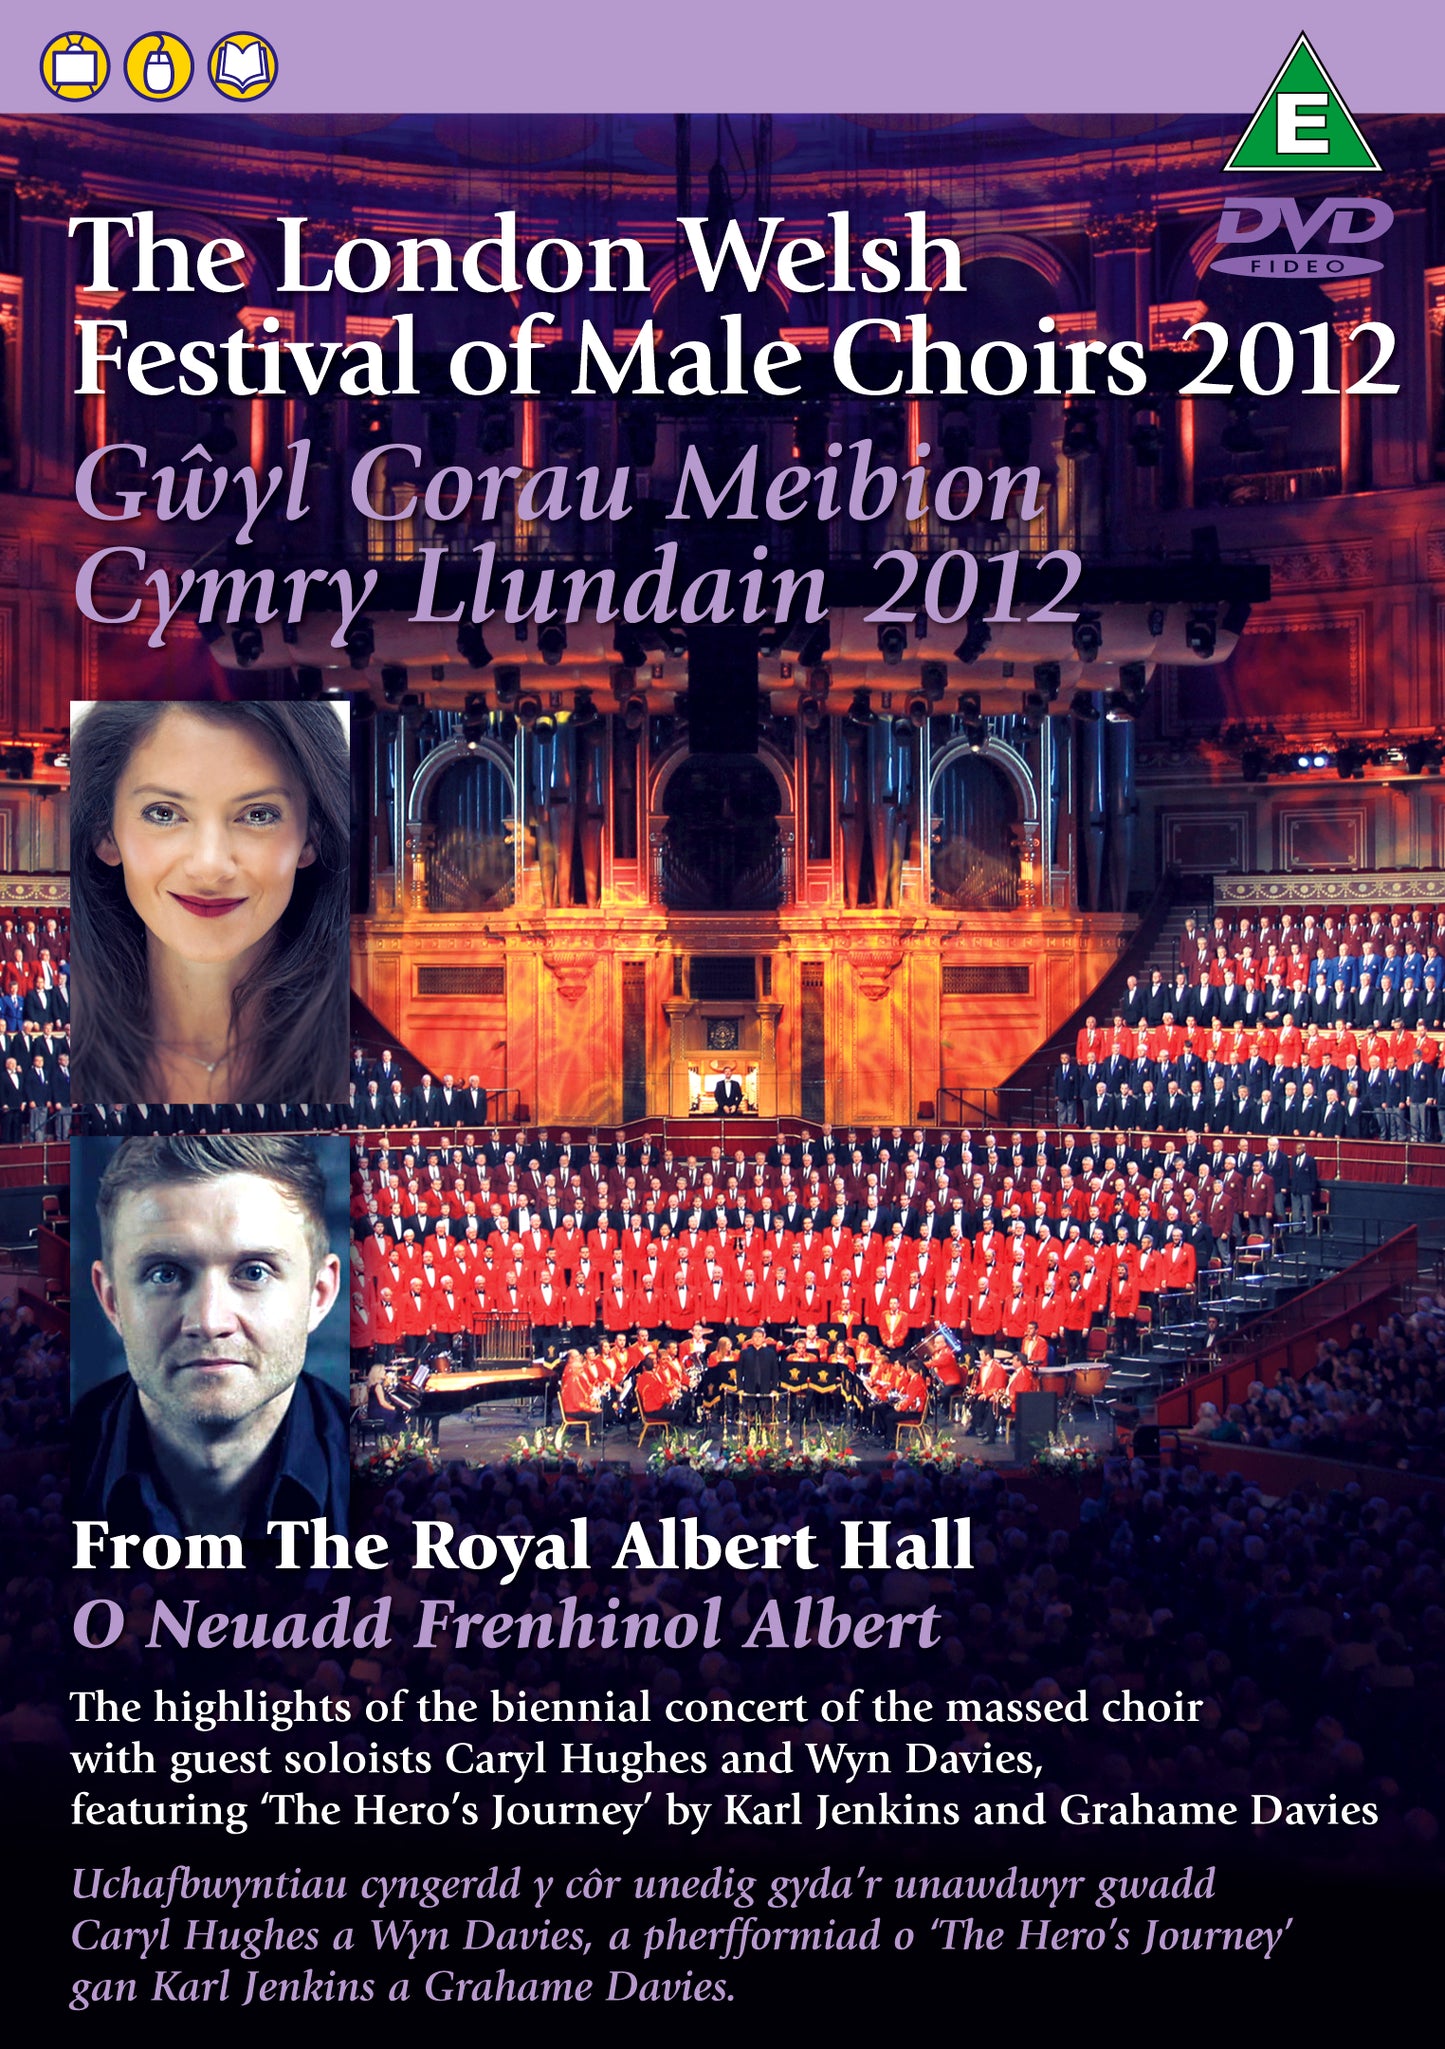 The London Welsh Festival of Male Choirs 2012